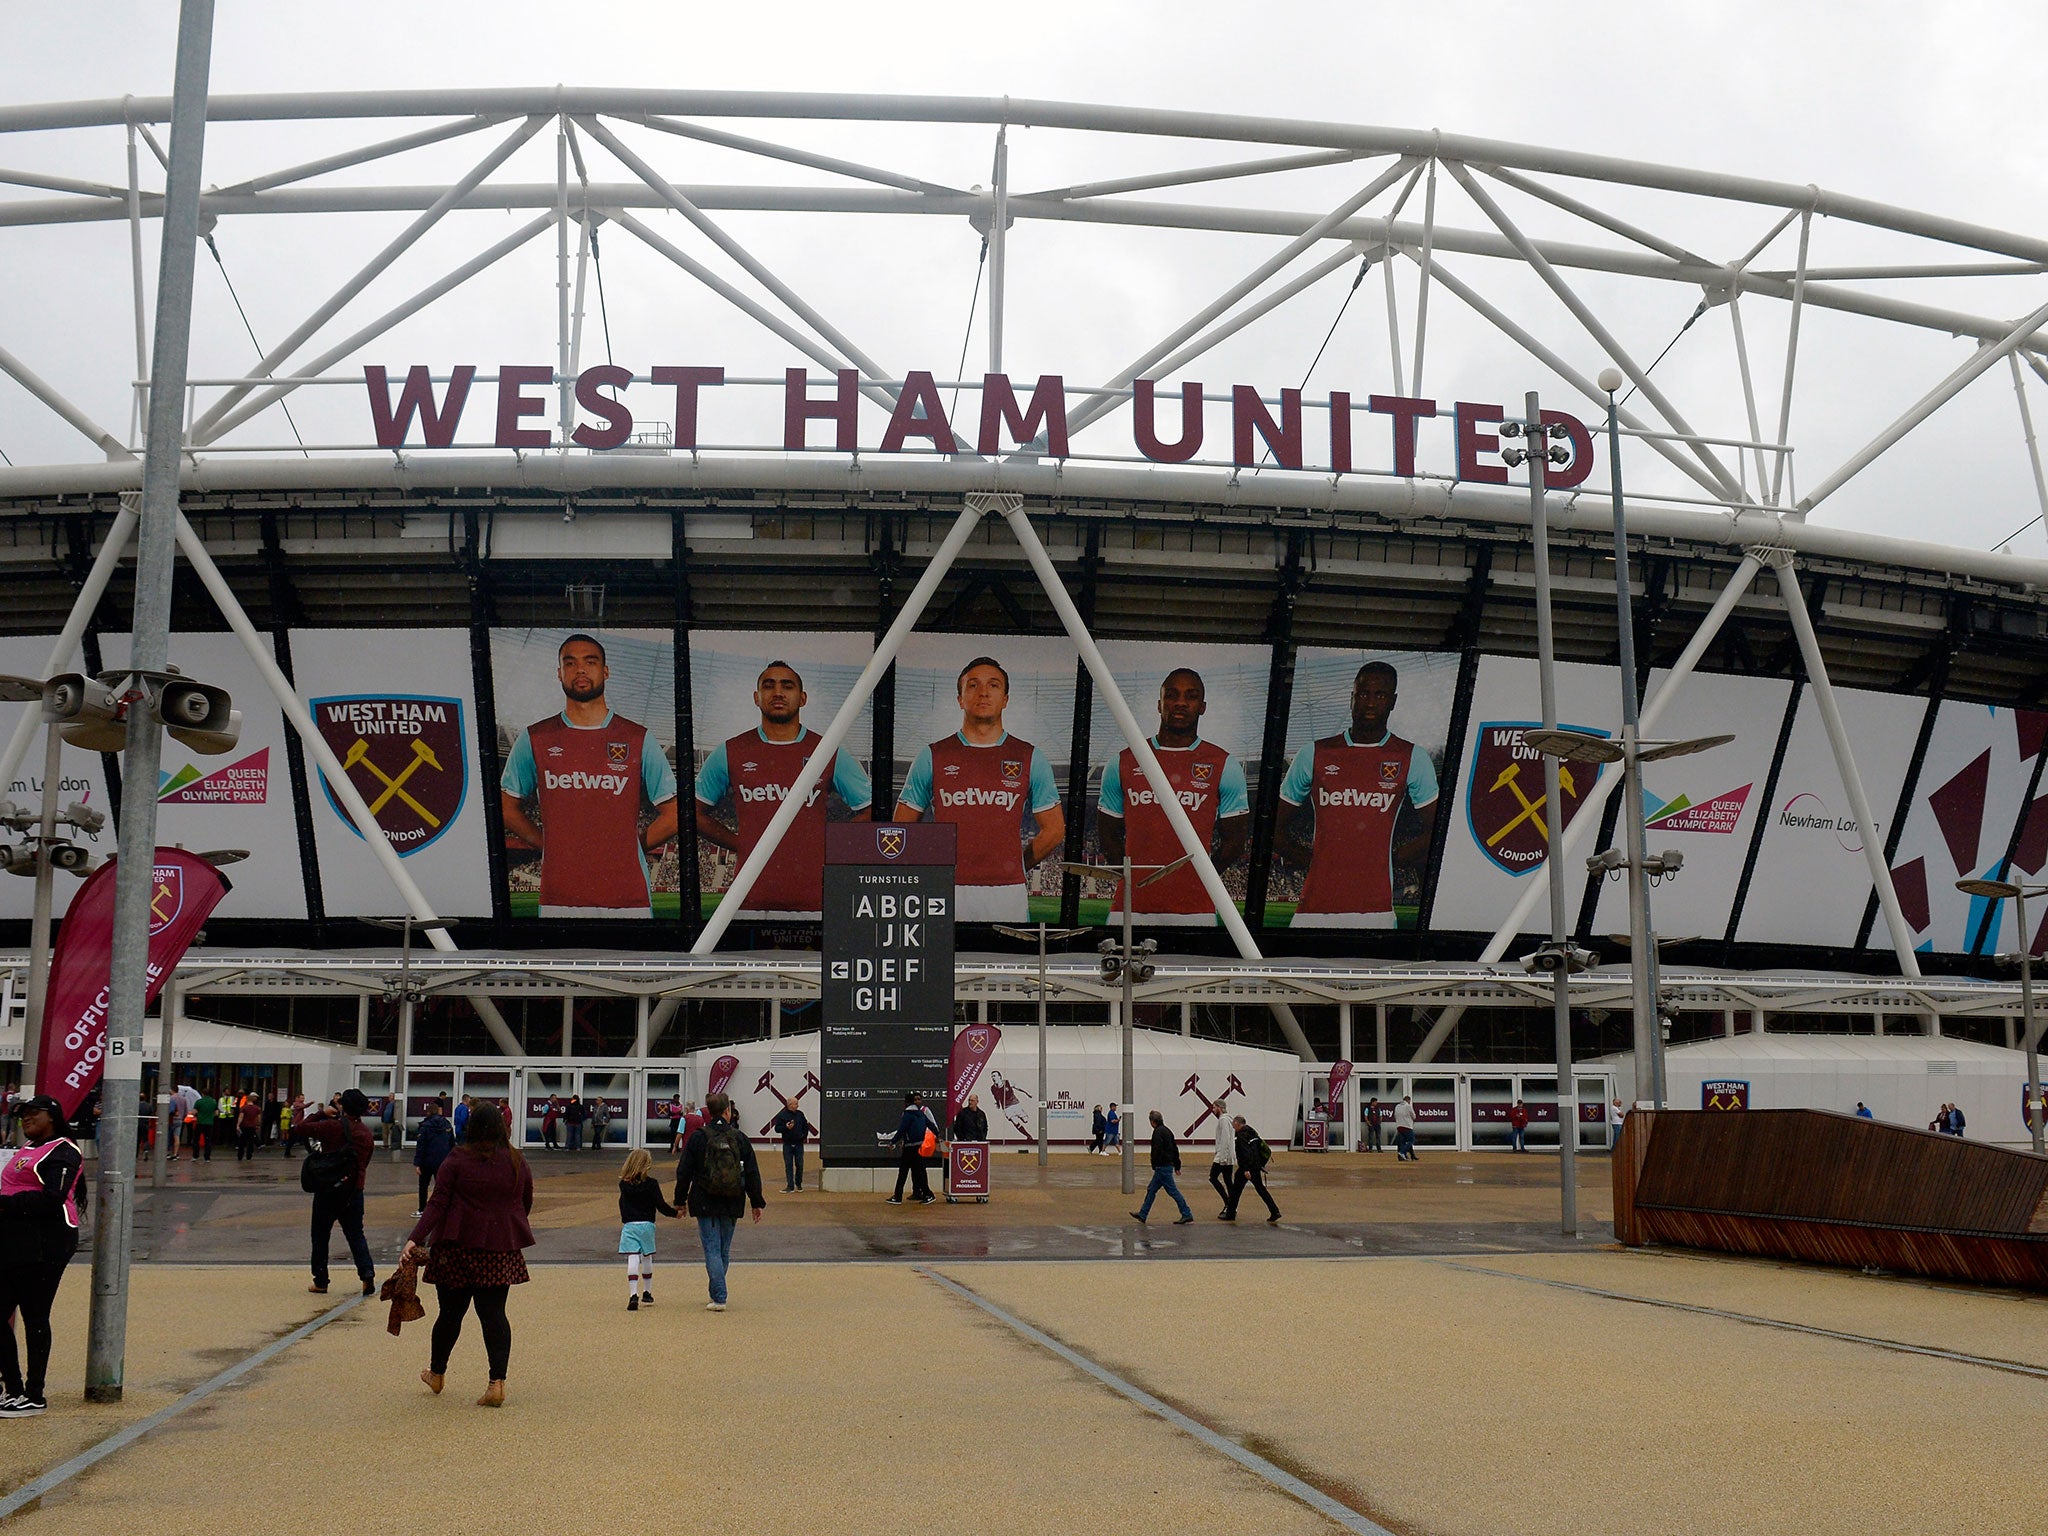 The ladies side will now be fully incorporated into the West Ham United administration